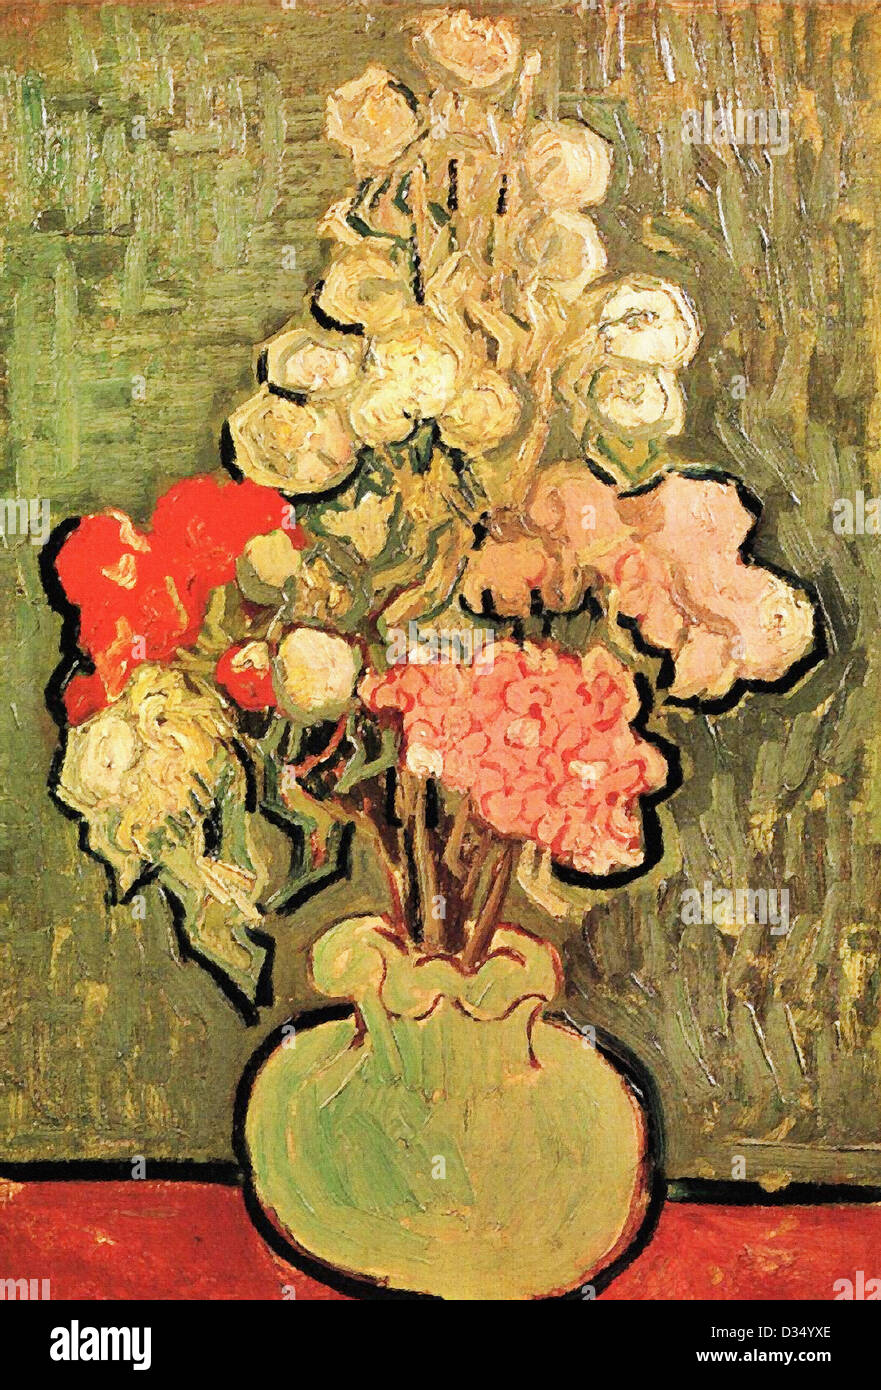 Vincent van Gogh, Still Life Vase with Rose-Mallows. 1890. Post-Impressionism. Oil on canvas. Van Gogh Museum, Amsterdam Stock Photo